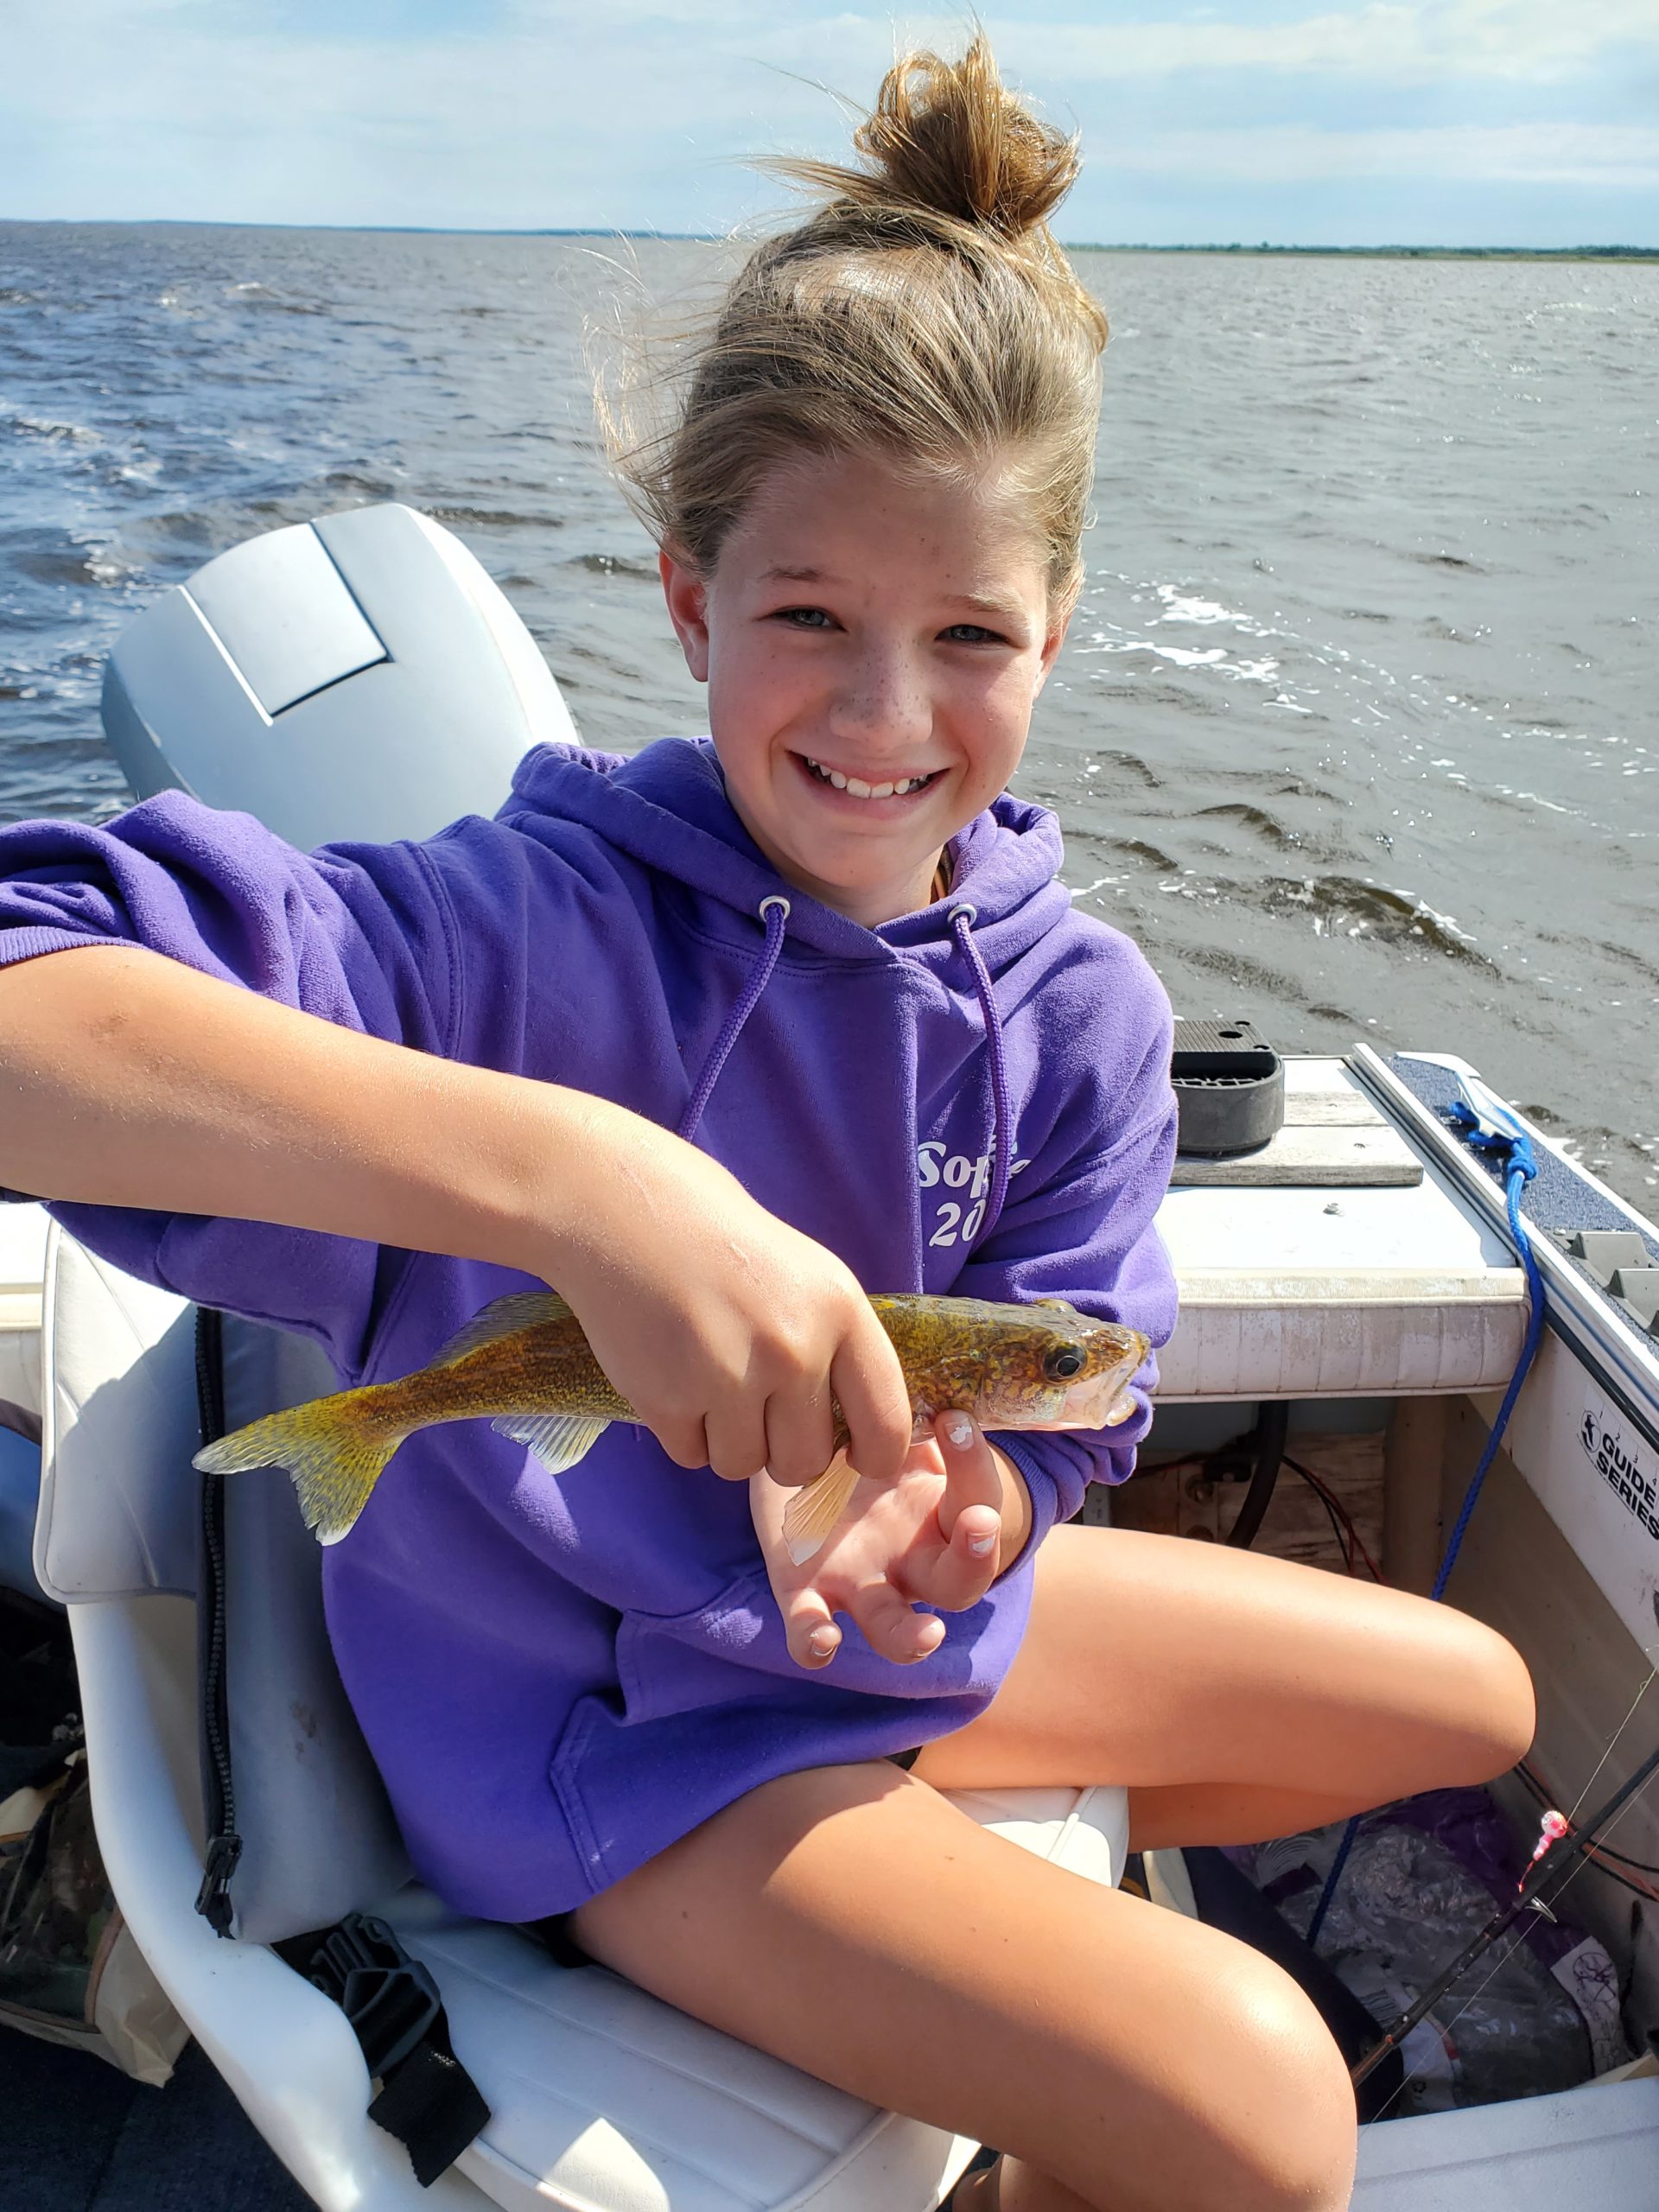 Exciting Take a Kid Fishing Event at Lake of the Woods - Lake of the Woods